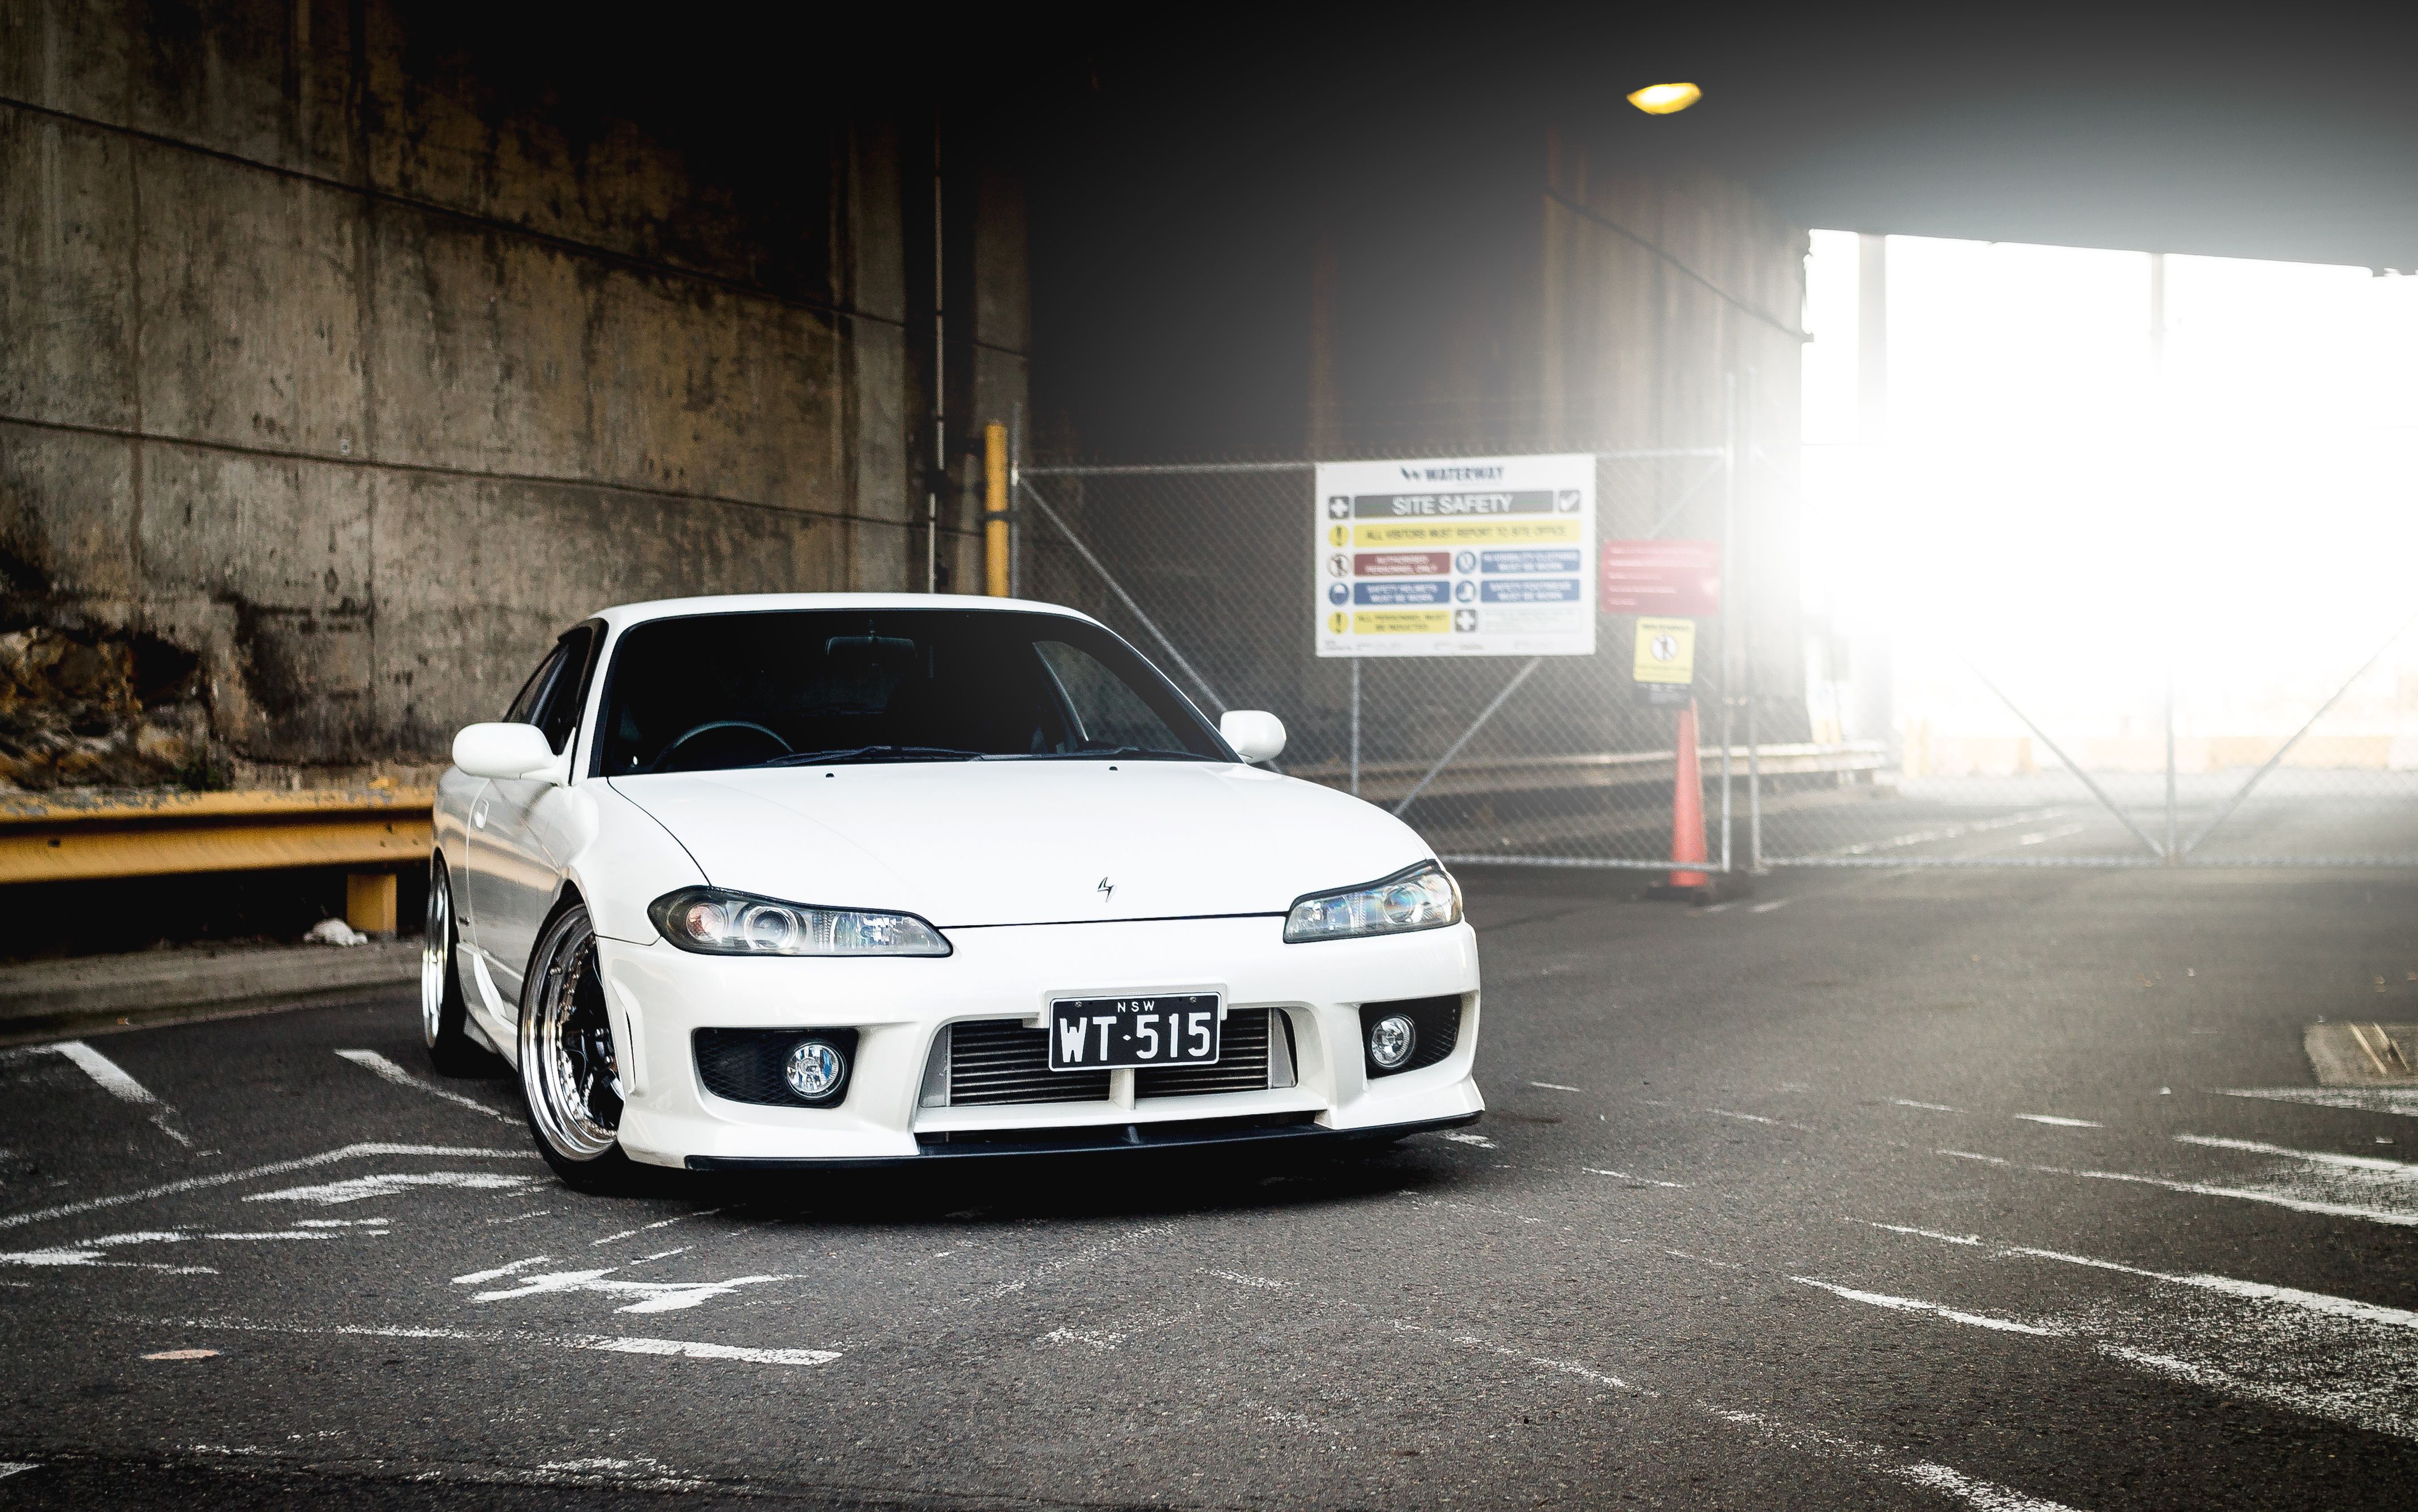 544642 1920x1080 need for speed nissan s15 silvia s15 nissan silvia s15 car  wallpaper JPG 297 kB  Rare Gallery HD Wallpapers